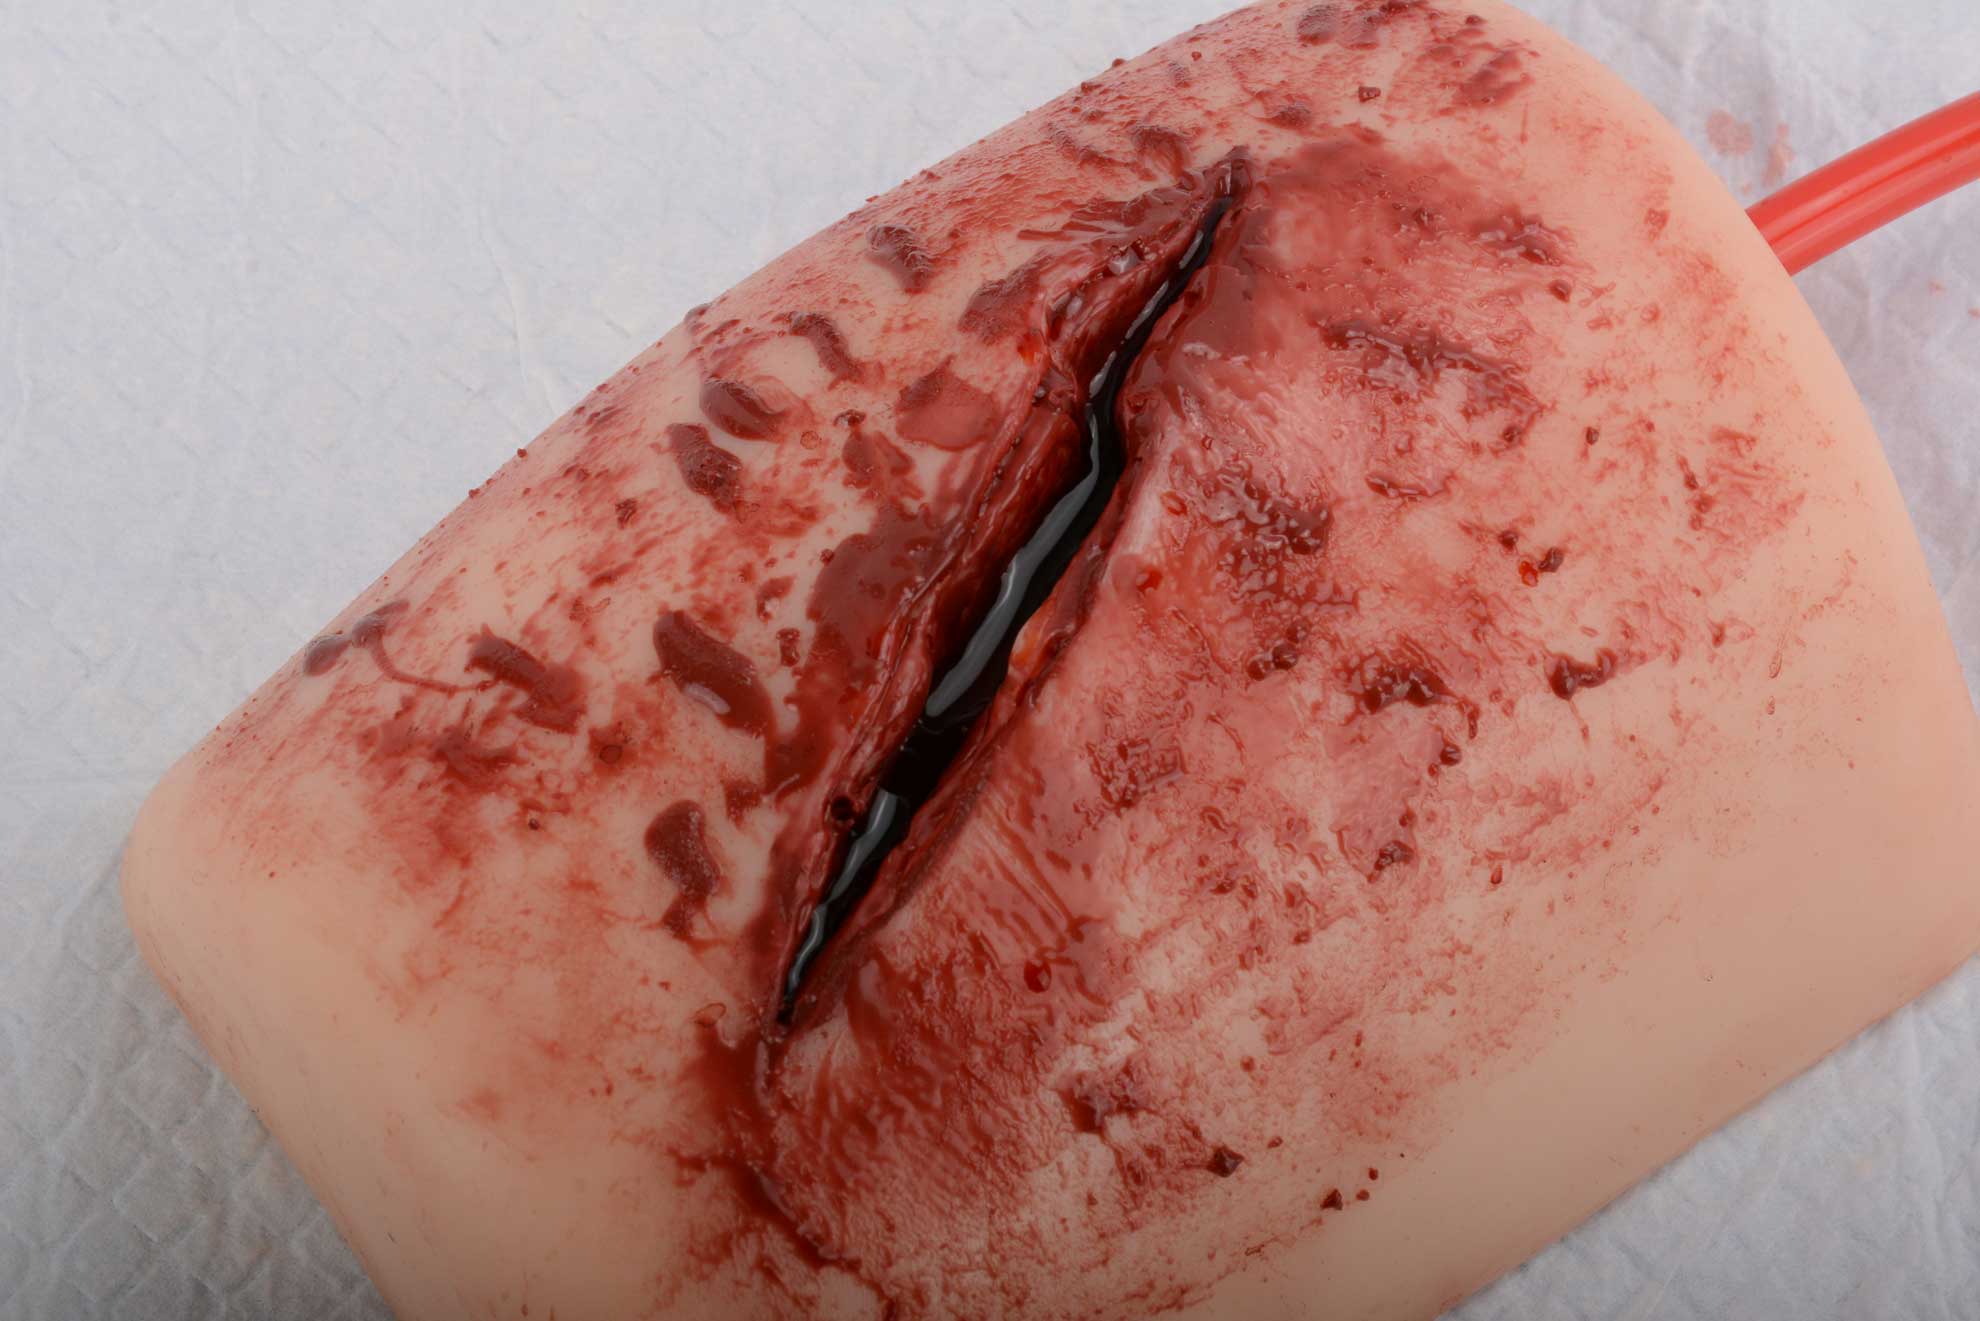 Wound Packing Training Models